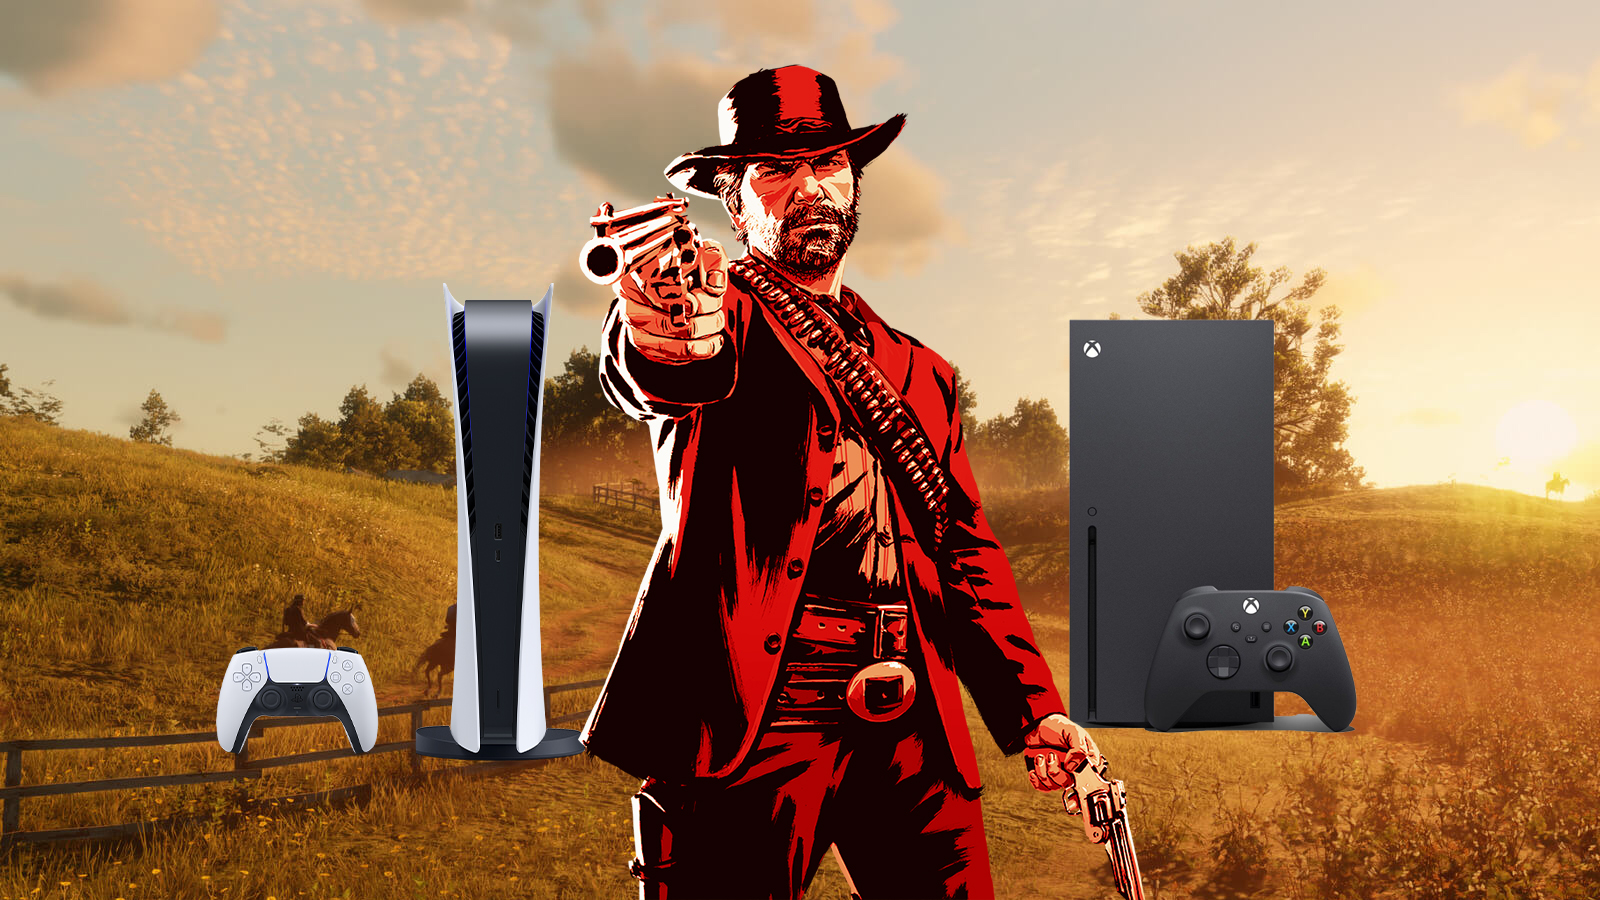 RDR2's PS5 & Xbox Series X Upgrade Also Canceled, Says Leaker